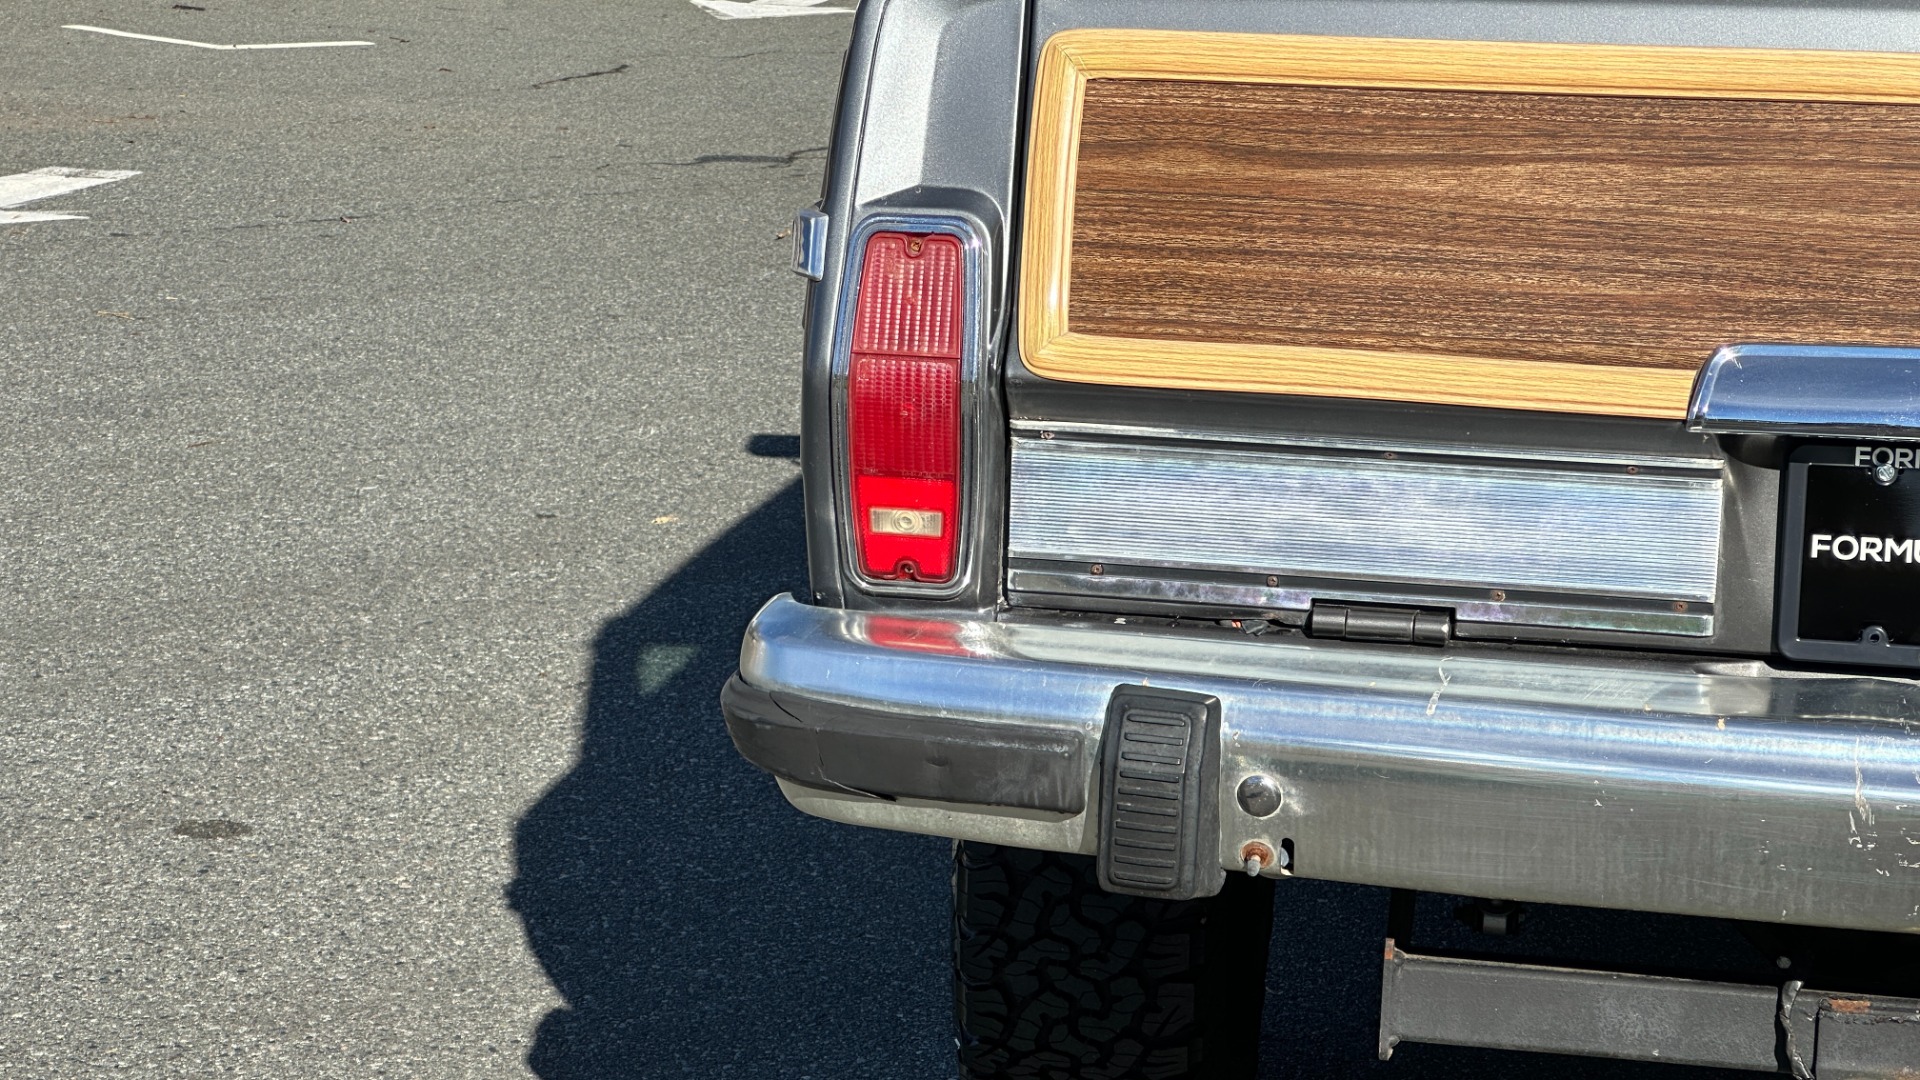 Used 1988 Jeep Grand Wagoneer 5.9L V8 ENGINE / LEATHER AND CLOTH / WOOD SIDING / 4WD for sale $21,995 at Formula Imports in Charlotte NC 28227 9